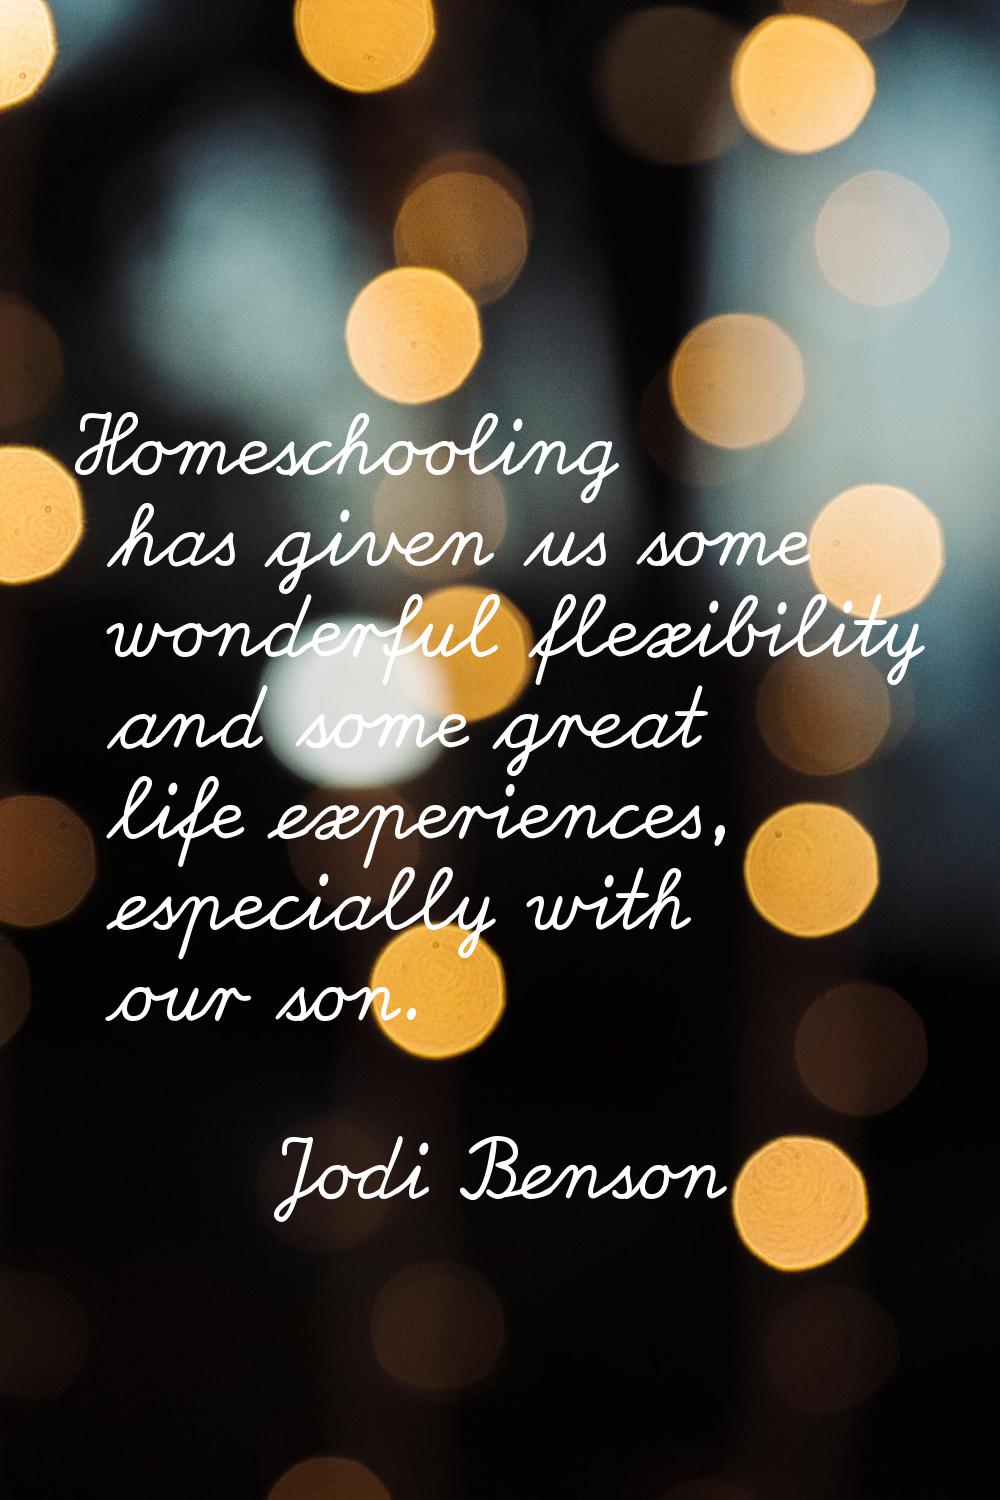 Homeschooling has given us some wonderful flexibility and some great life experiences, especially w